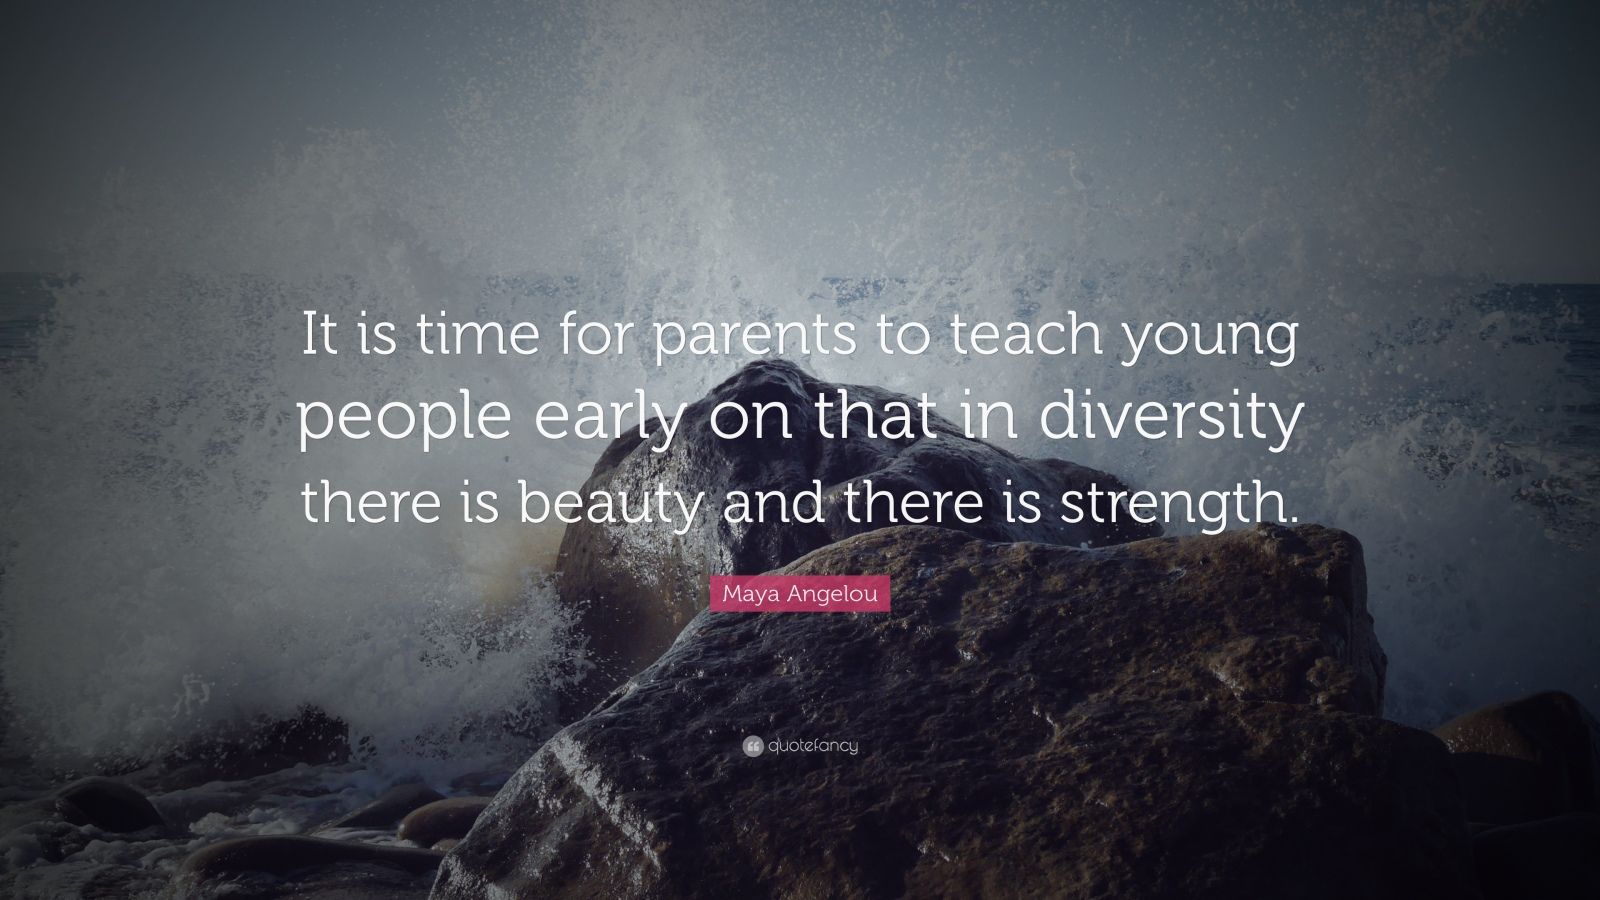 Maya Angelou Quote: "It is time for parents to teach young people early on that in diversity ...